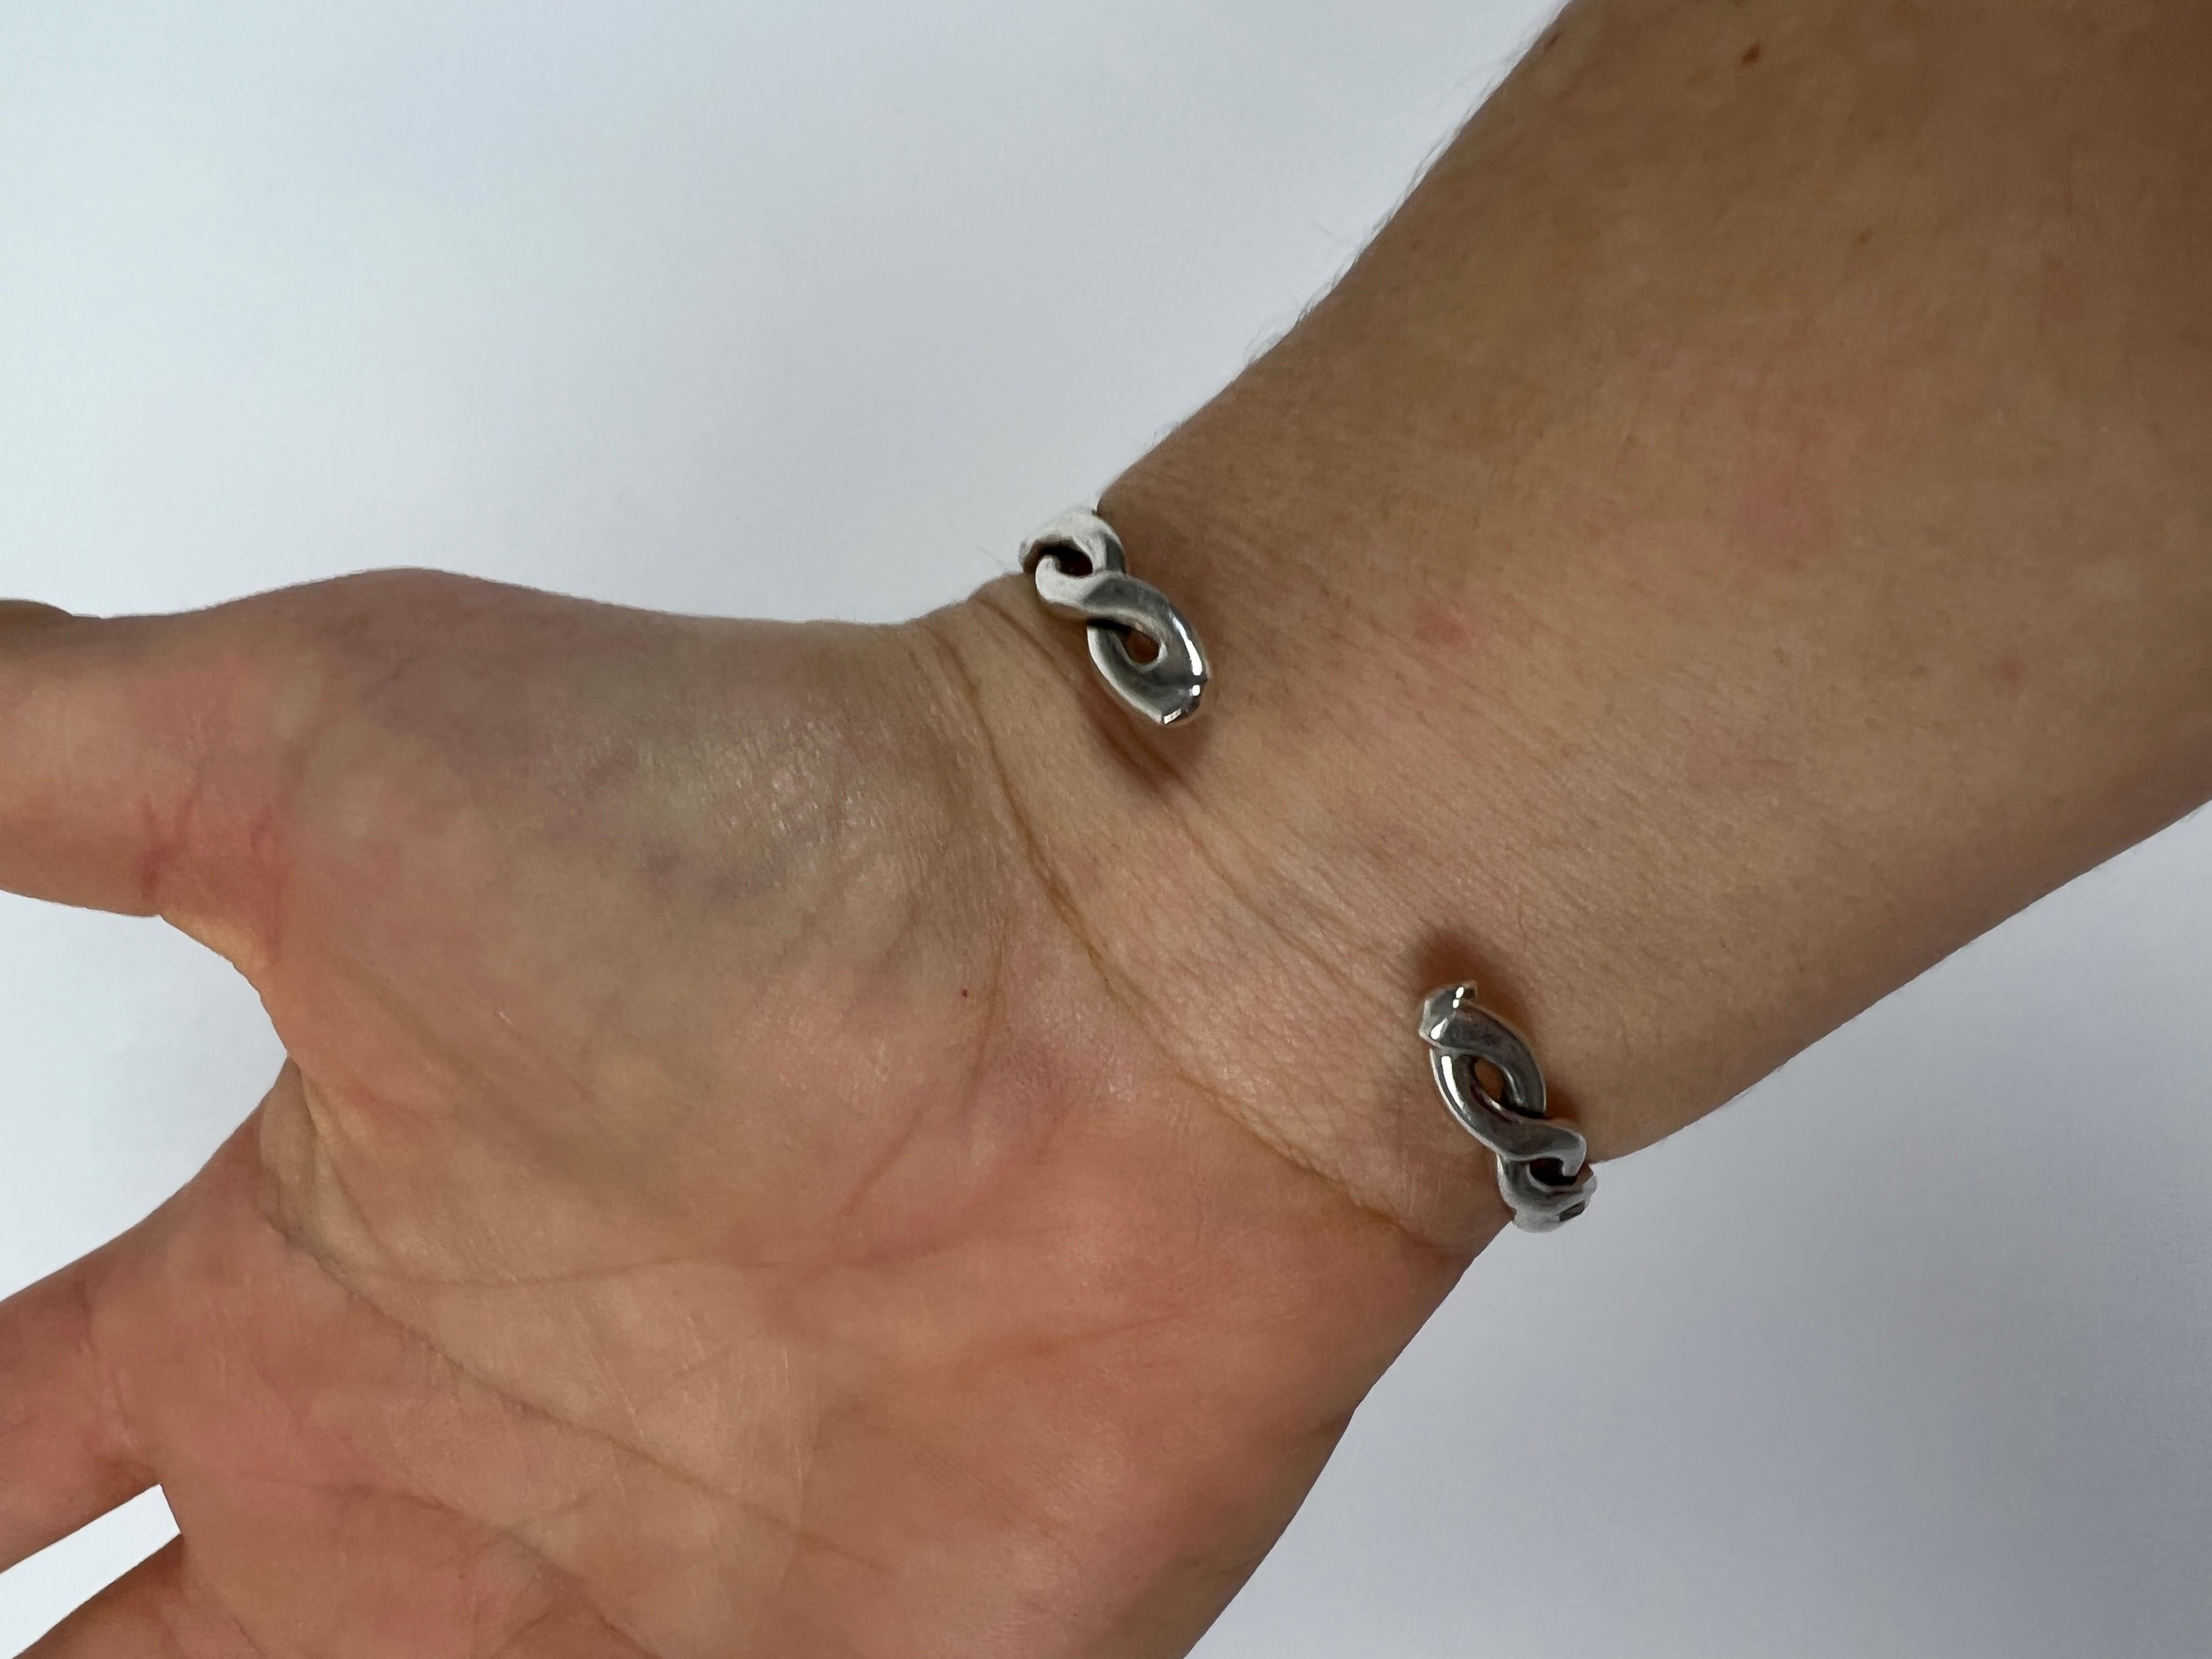 Women's or Men's Mexican Braided Cuff Bracelet, Sterling Silver, Thin Cuff